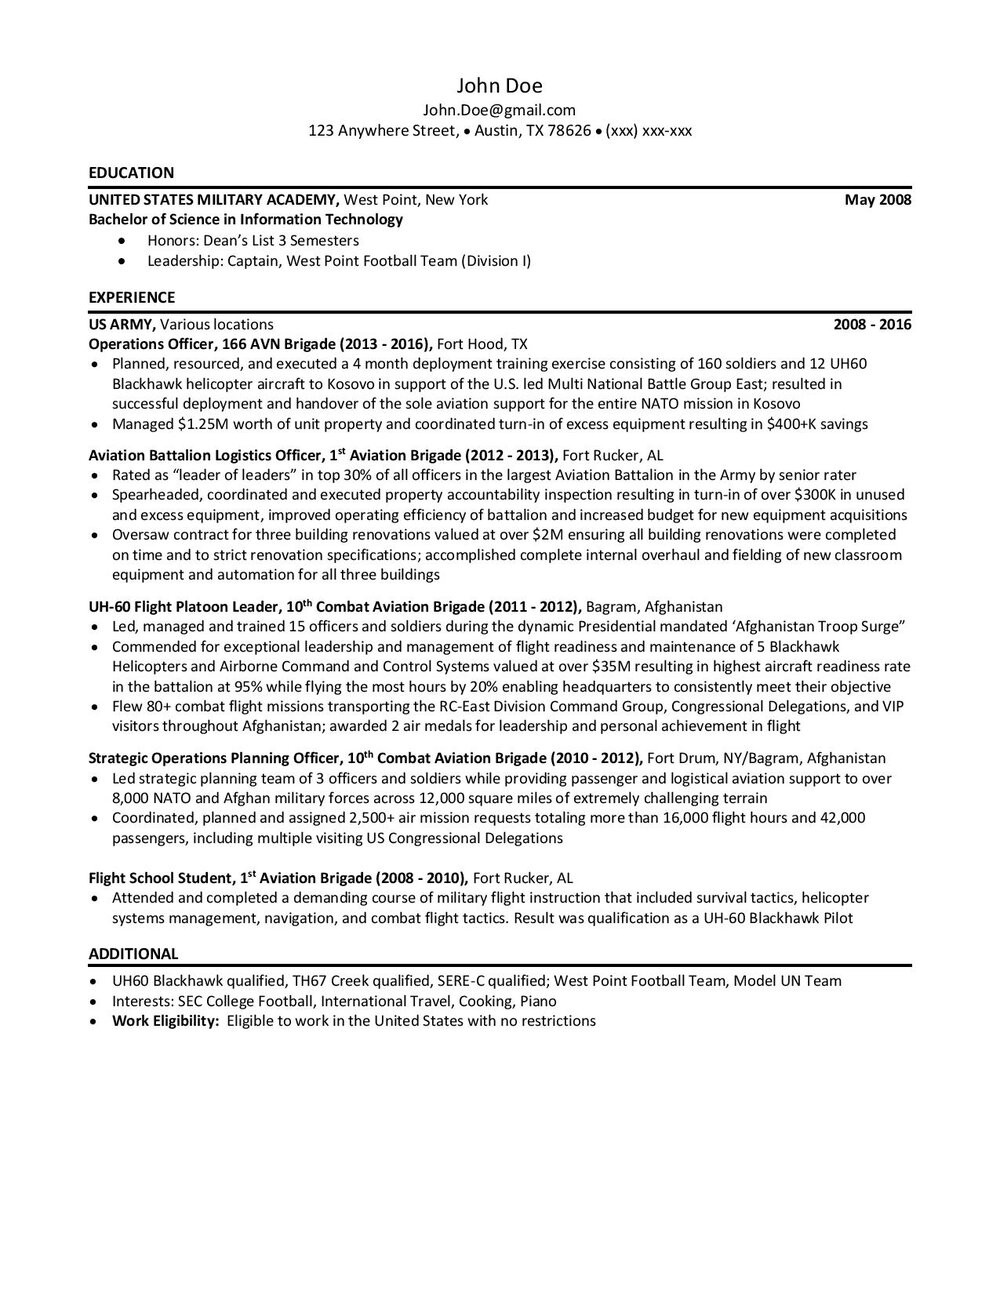 Resume Sample From A Air force Veteran Military to Civilian Resume Guide â Post Military Career Options